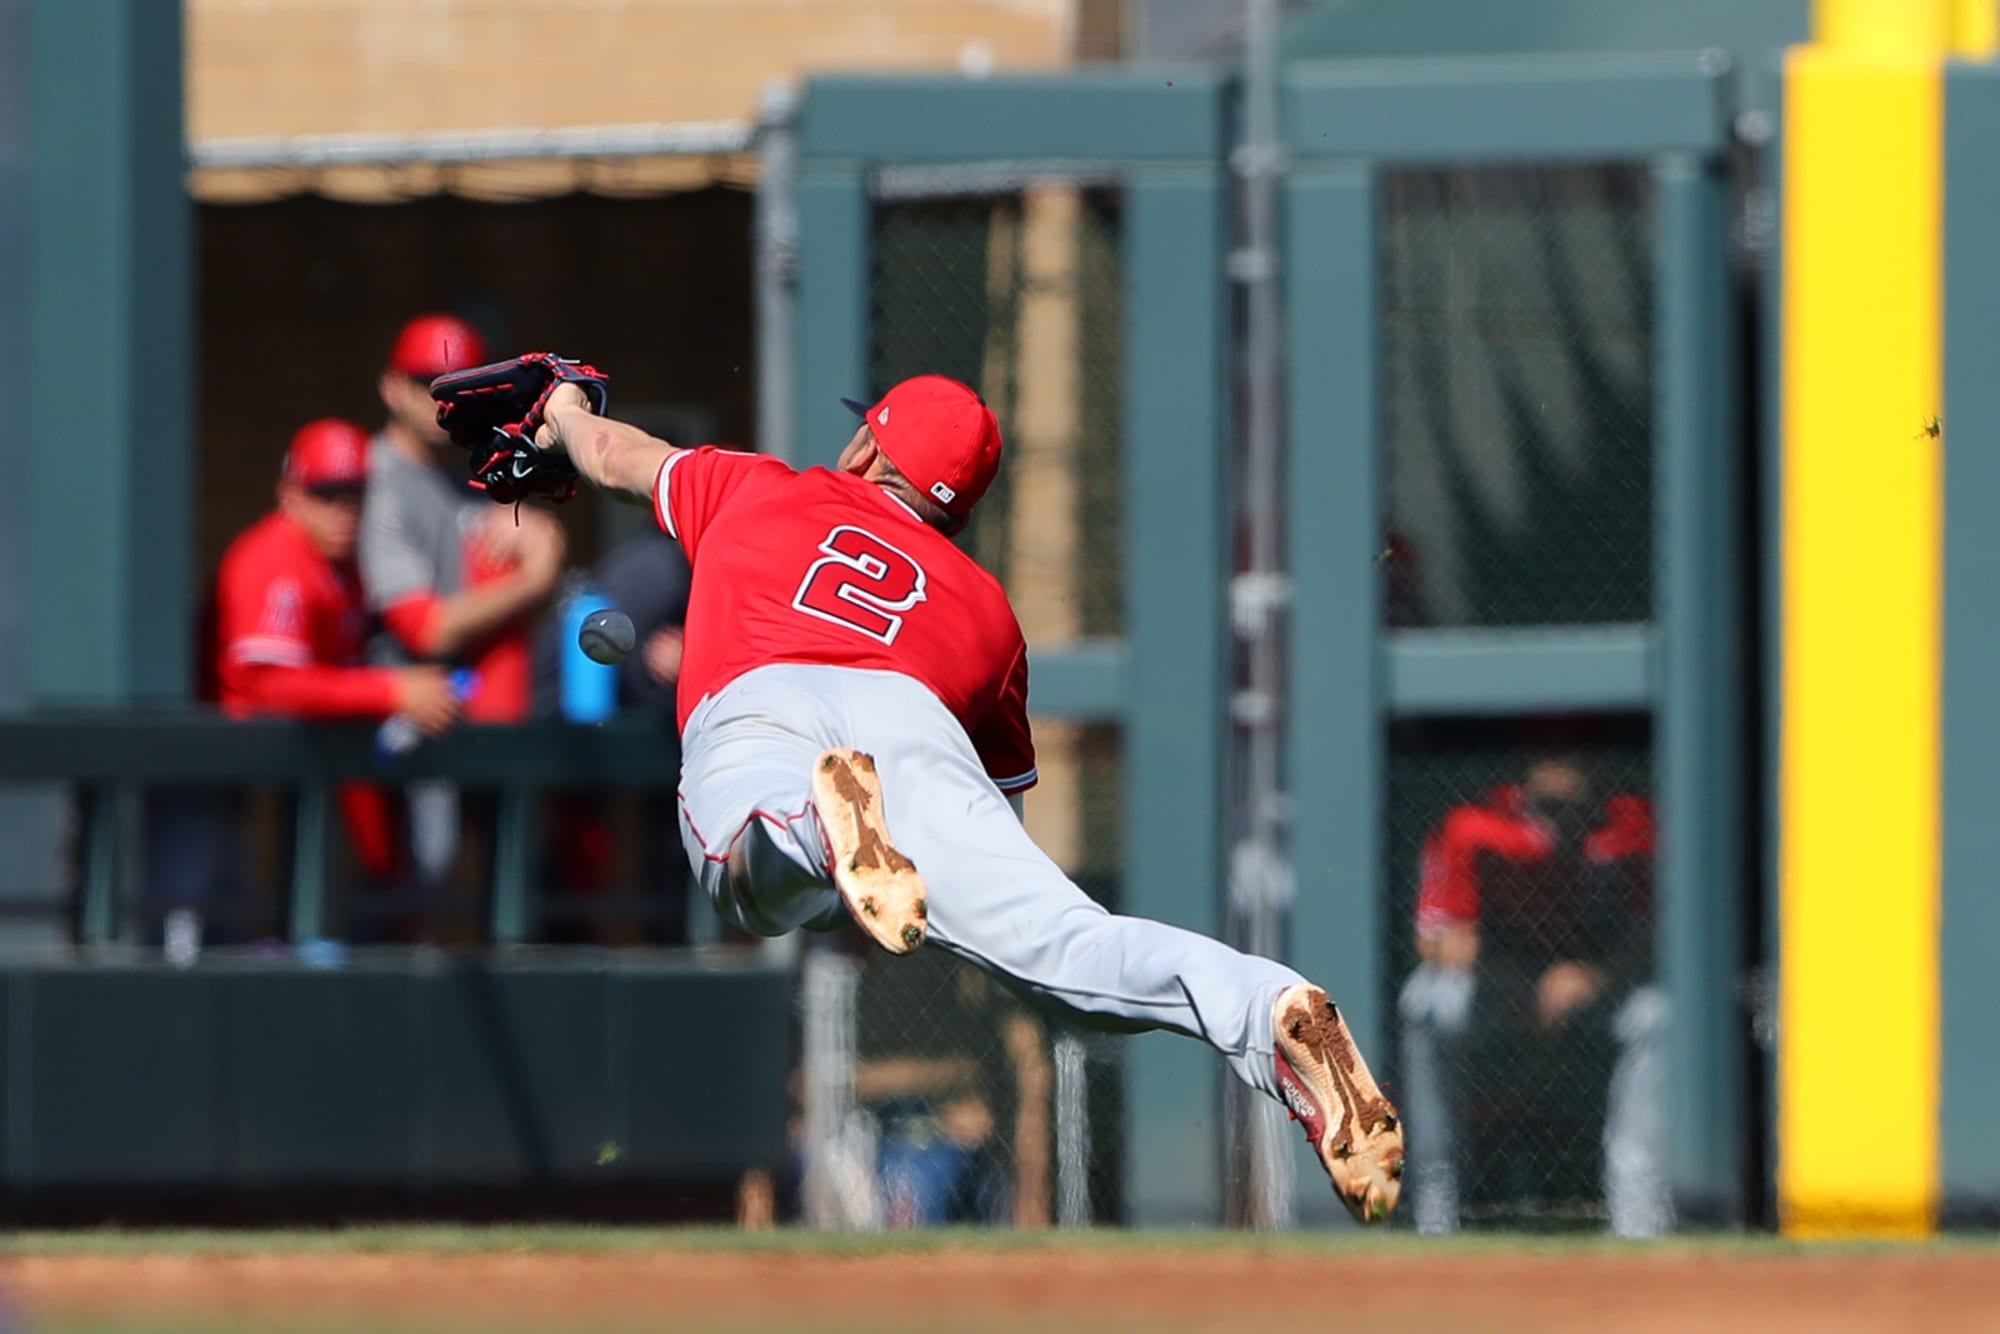 A look at Mike Trout's deal to remain an Angel through 2030